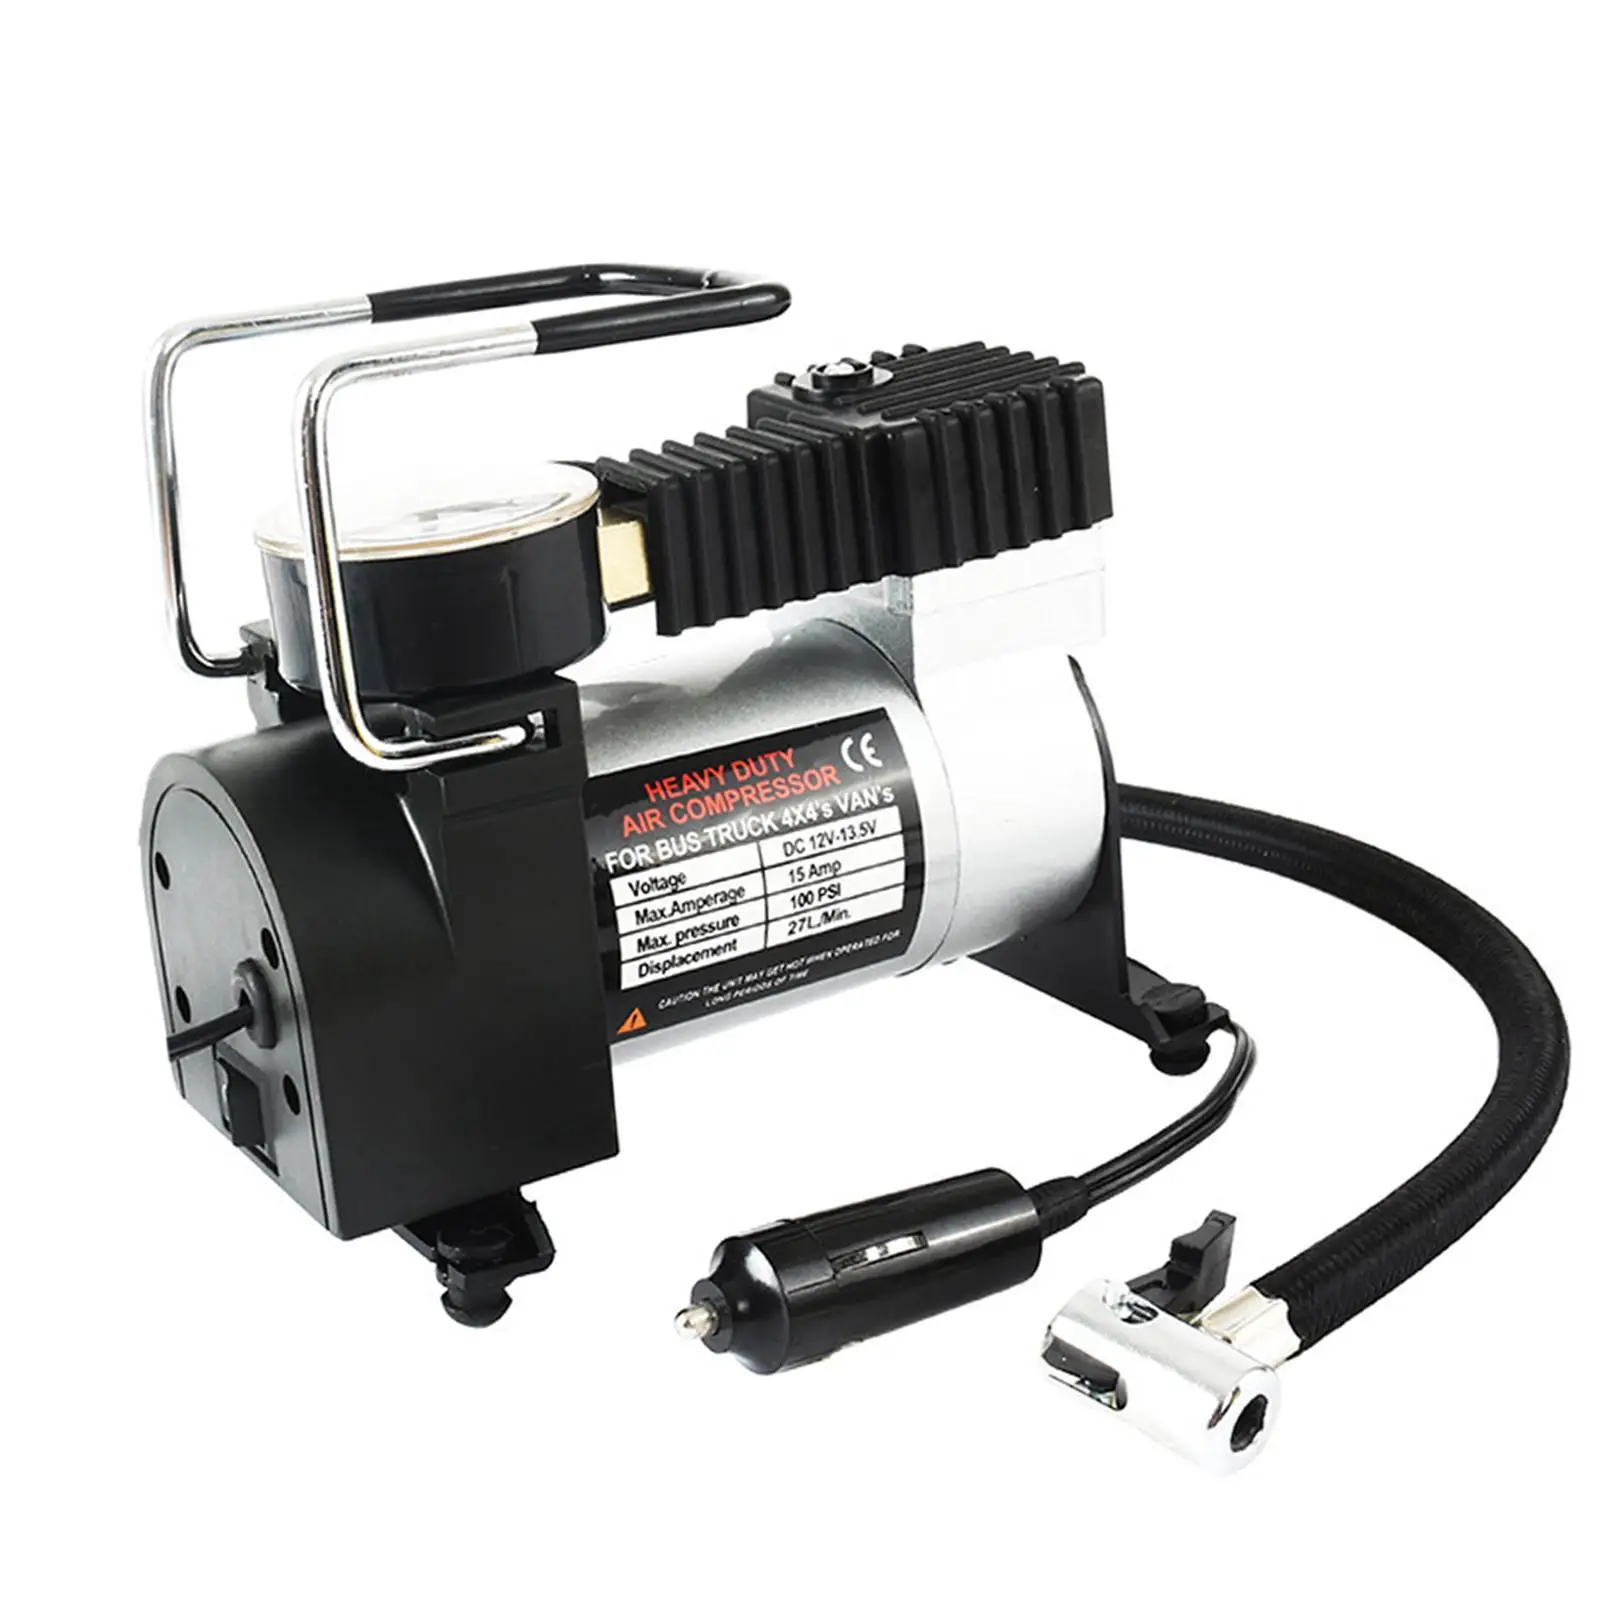 Tire Inflator Compact Portable Car Inflatable Pump for SUV Cars Van